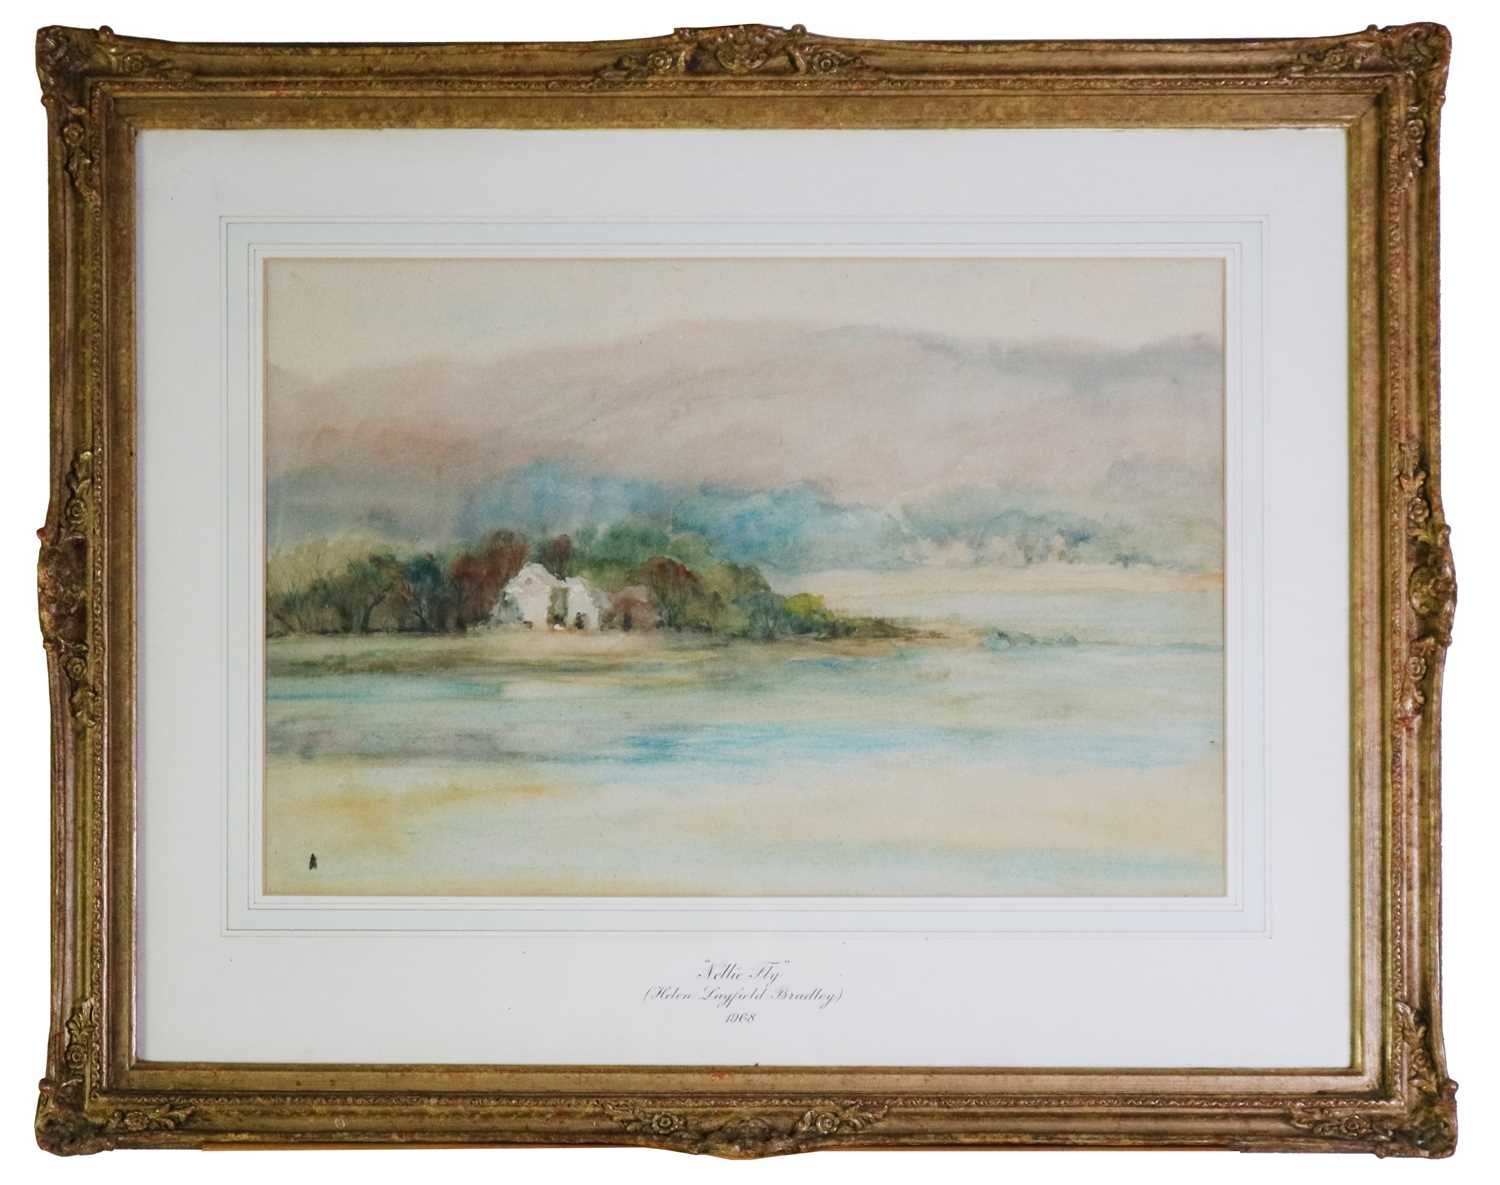 Helen Layfield Bradley (1900-1979) Nellie Fly, Watercolour of Lakeside Cottages